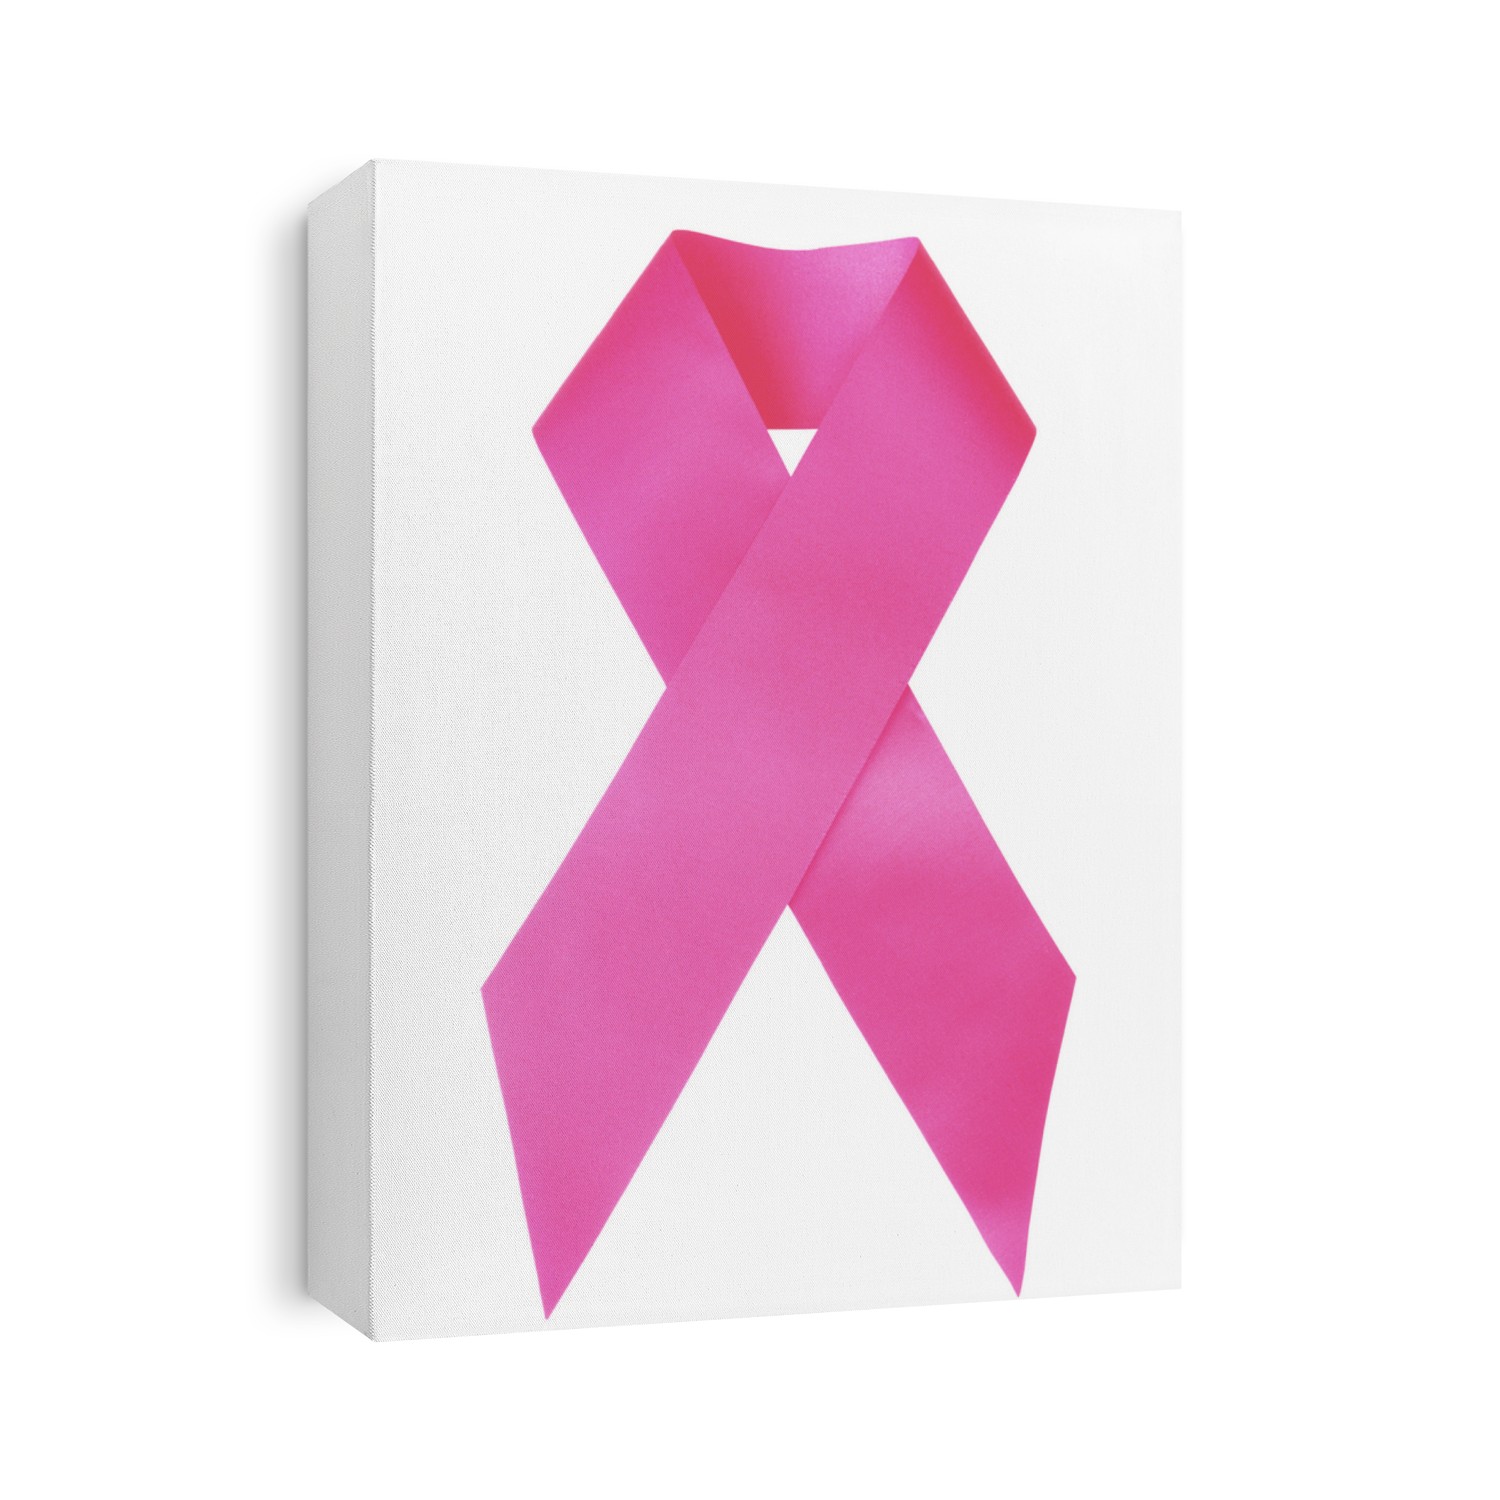 The Pink Ribbon, symbol for breast cancer awareness, birth parents, and childhood cancer awareness